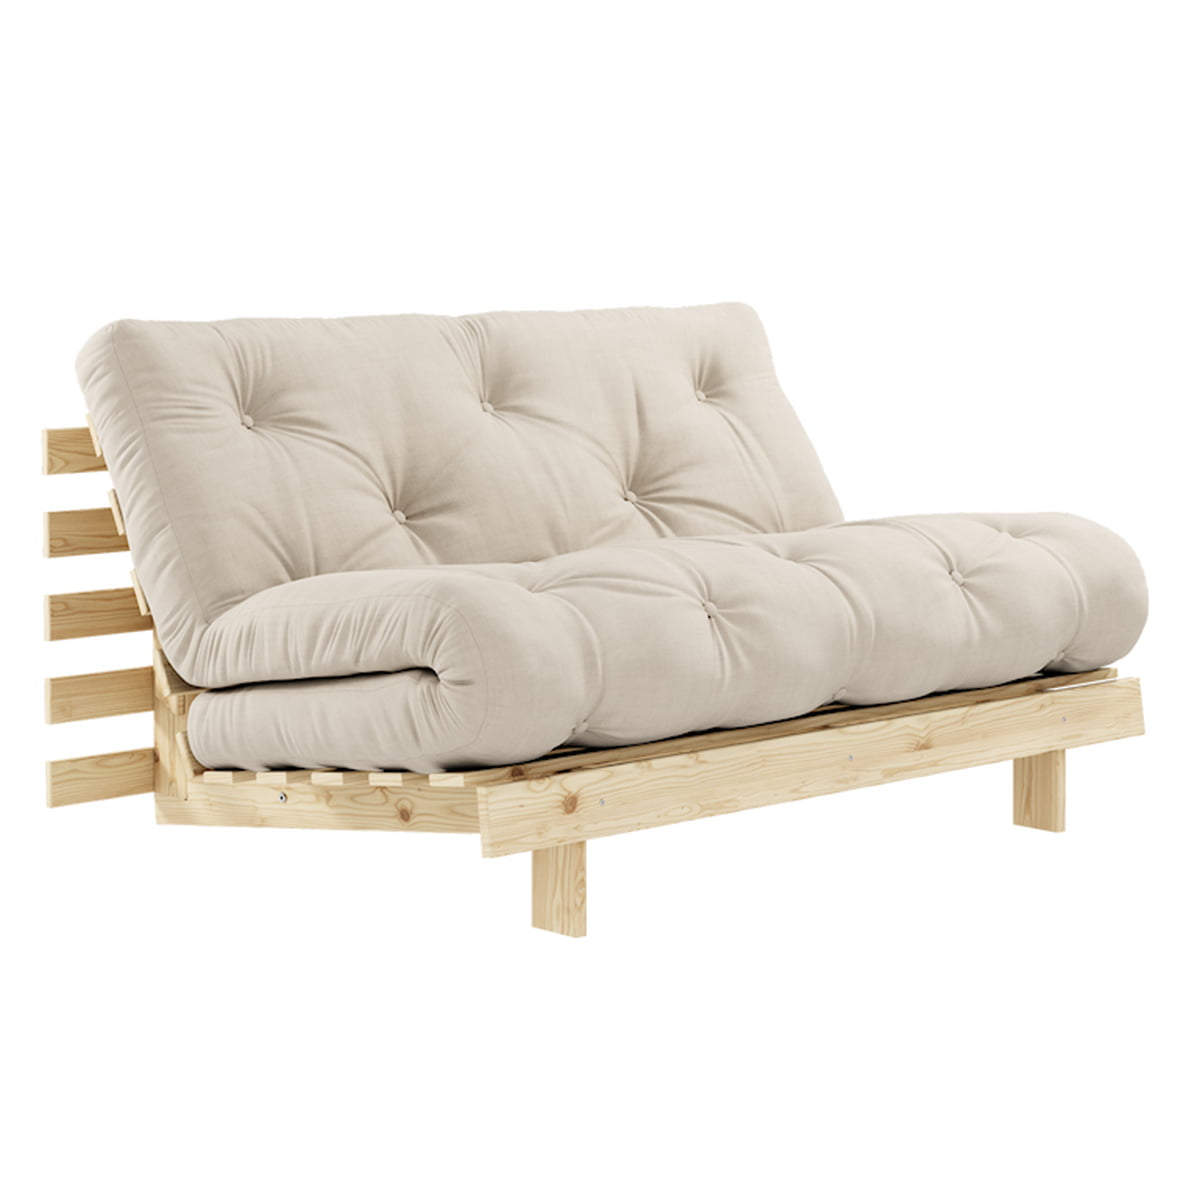 Karup Design - Roots Sofa bed | Connox